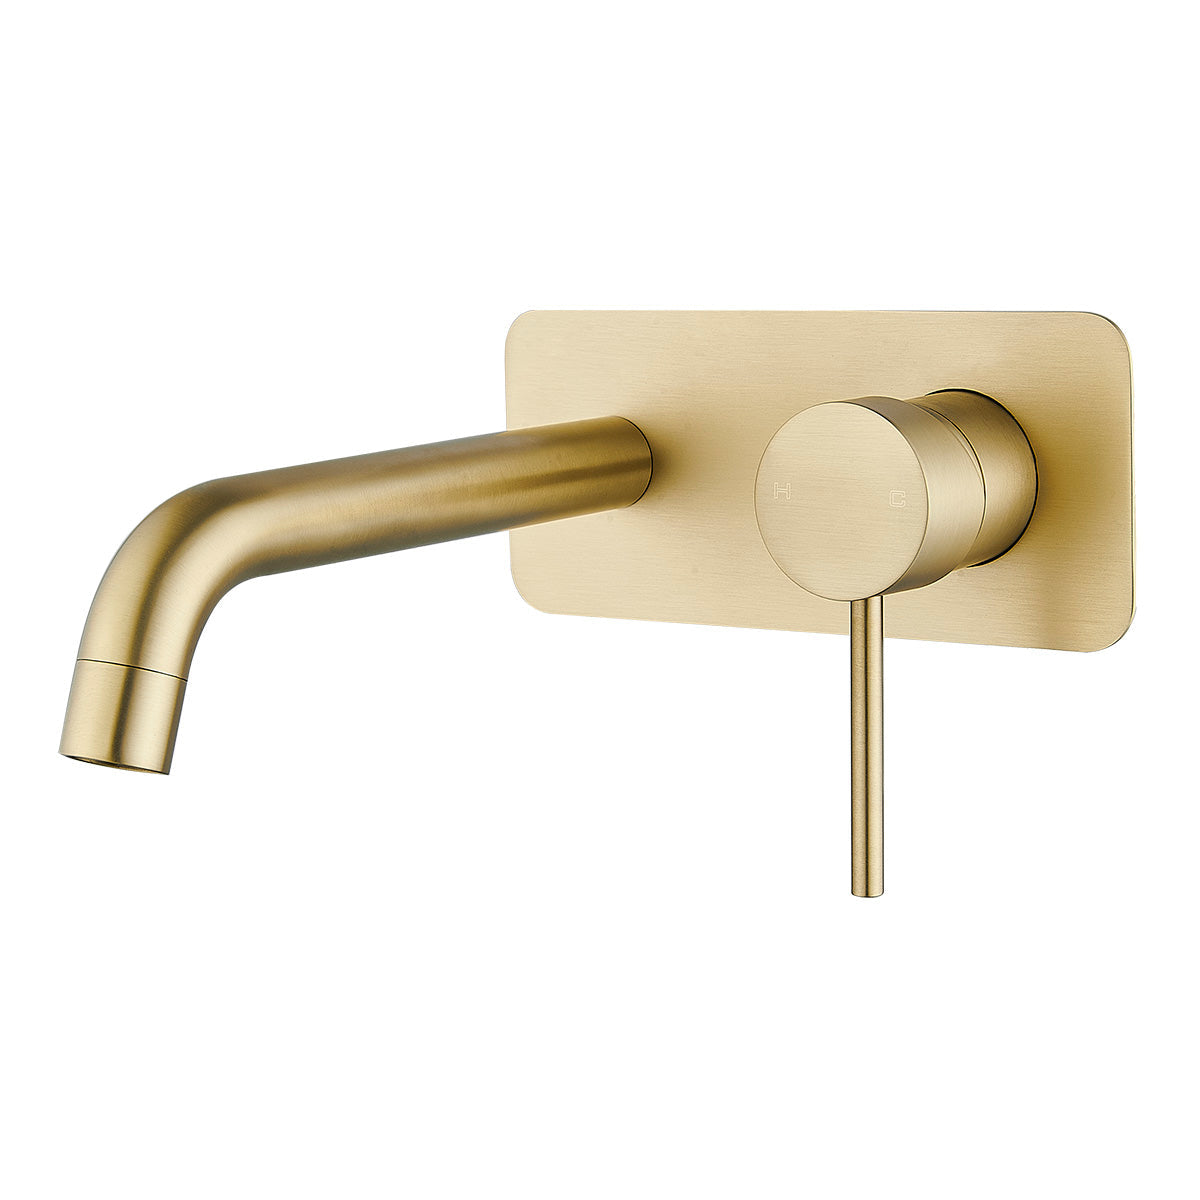 HELLYCAR IDEAL WALL MIXER WITH OUTLET 209MM BRUSHED GOLD